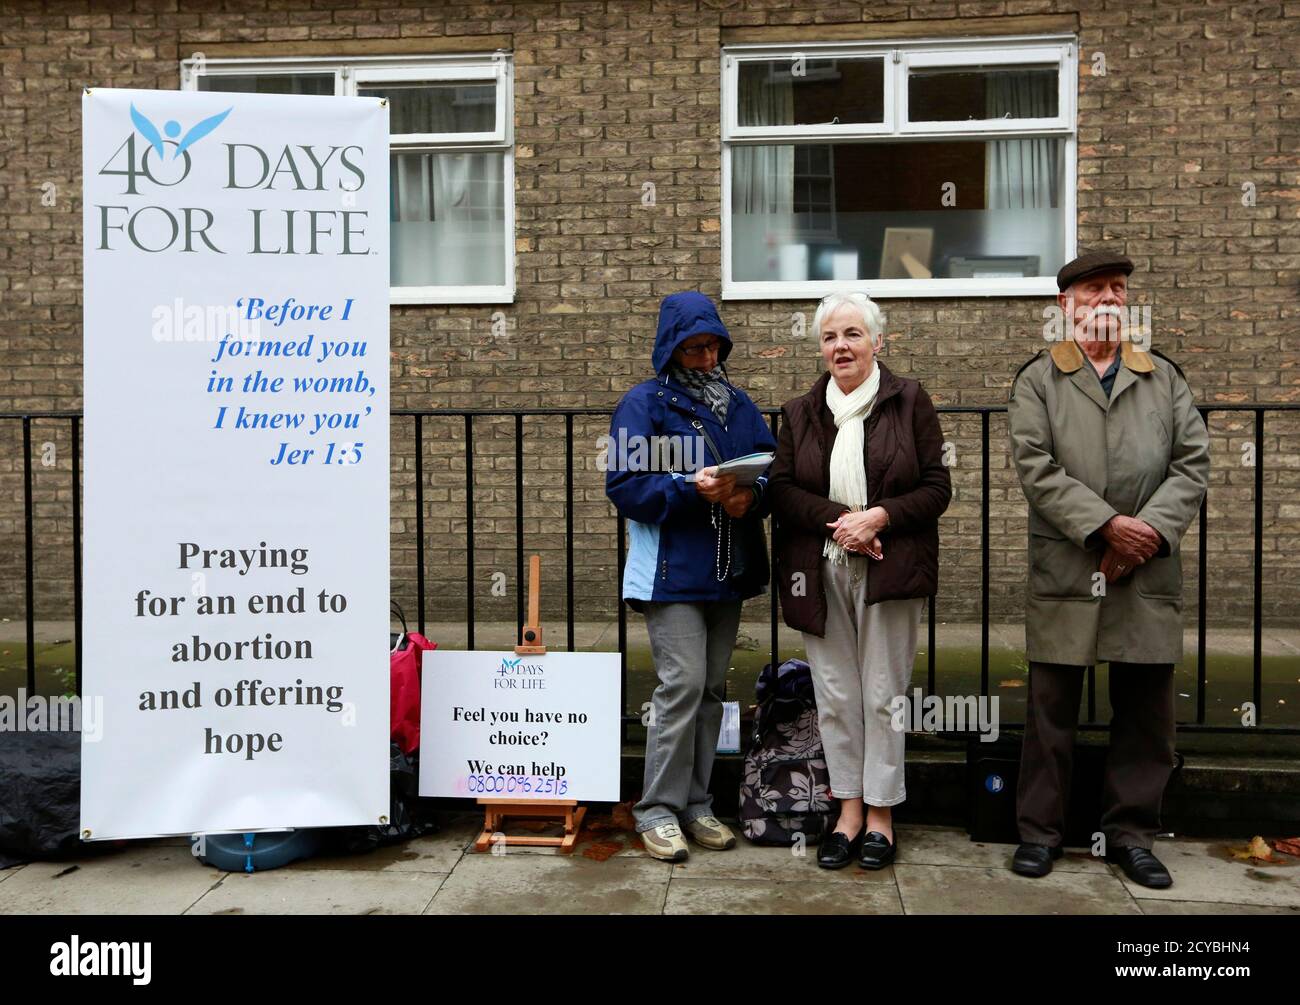 Campaigners from the 40 Days for Life anti-abortion campaign hold a prayer vigil opposite a Marie Stopes family planning clinic in London September 26, 2012. The U.S. group on Wednesday began a 40-day vigil outside nine clinics and hospitals in Britain. REUTERS/Olivia Harris   (BRITAIN - Tags: HEALTH SOCIETY RELIGION CIVIL UNREST) Stock Photo